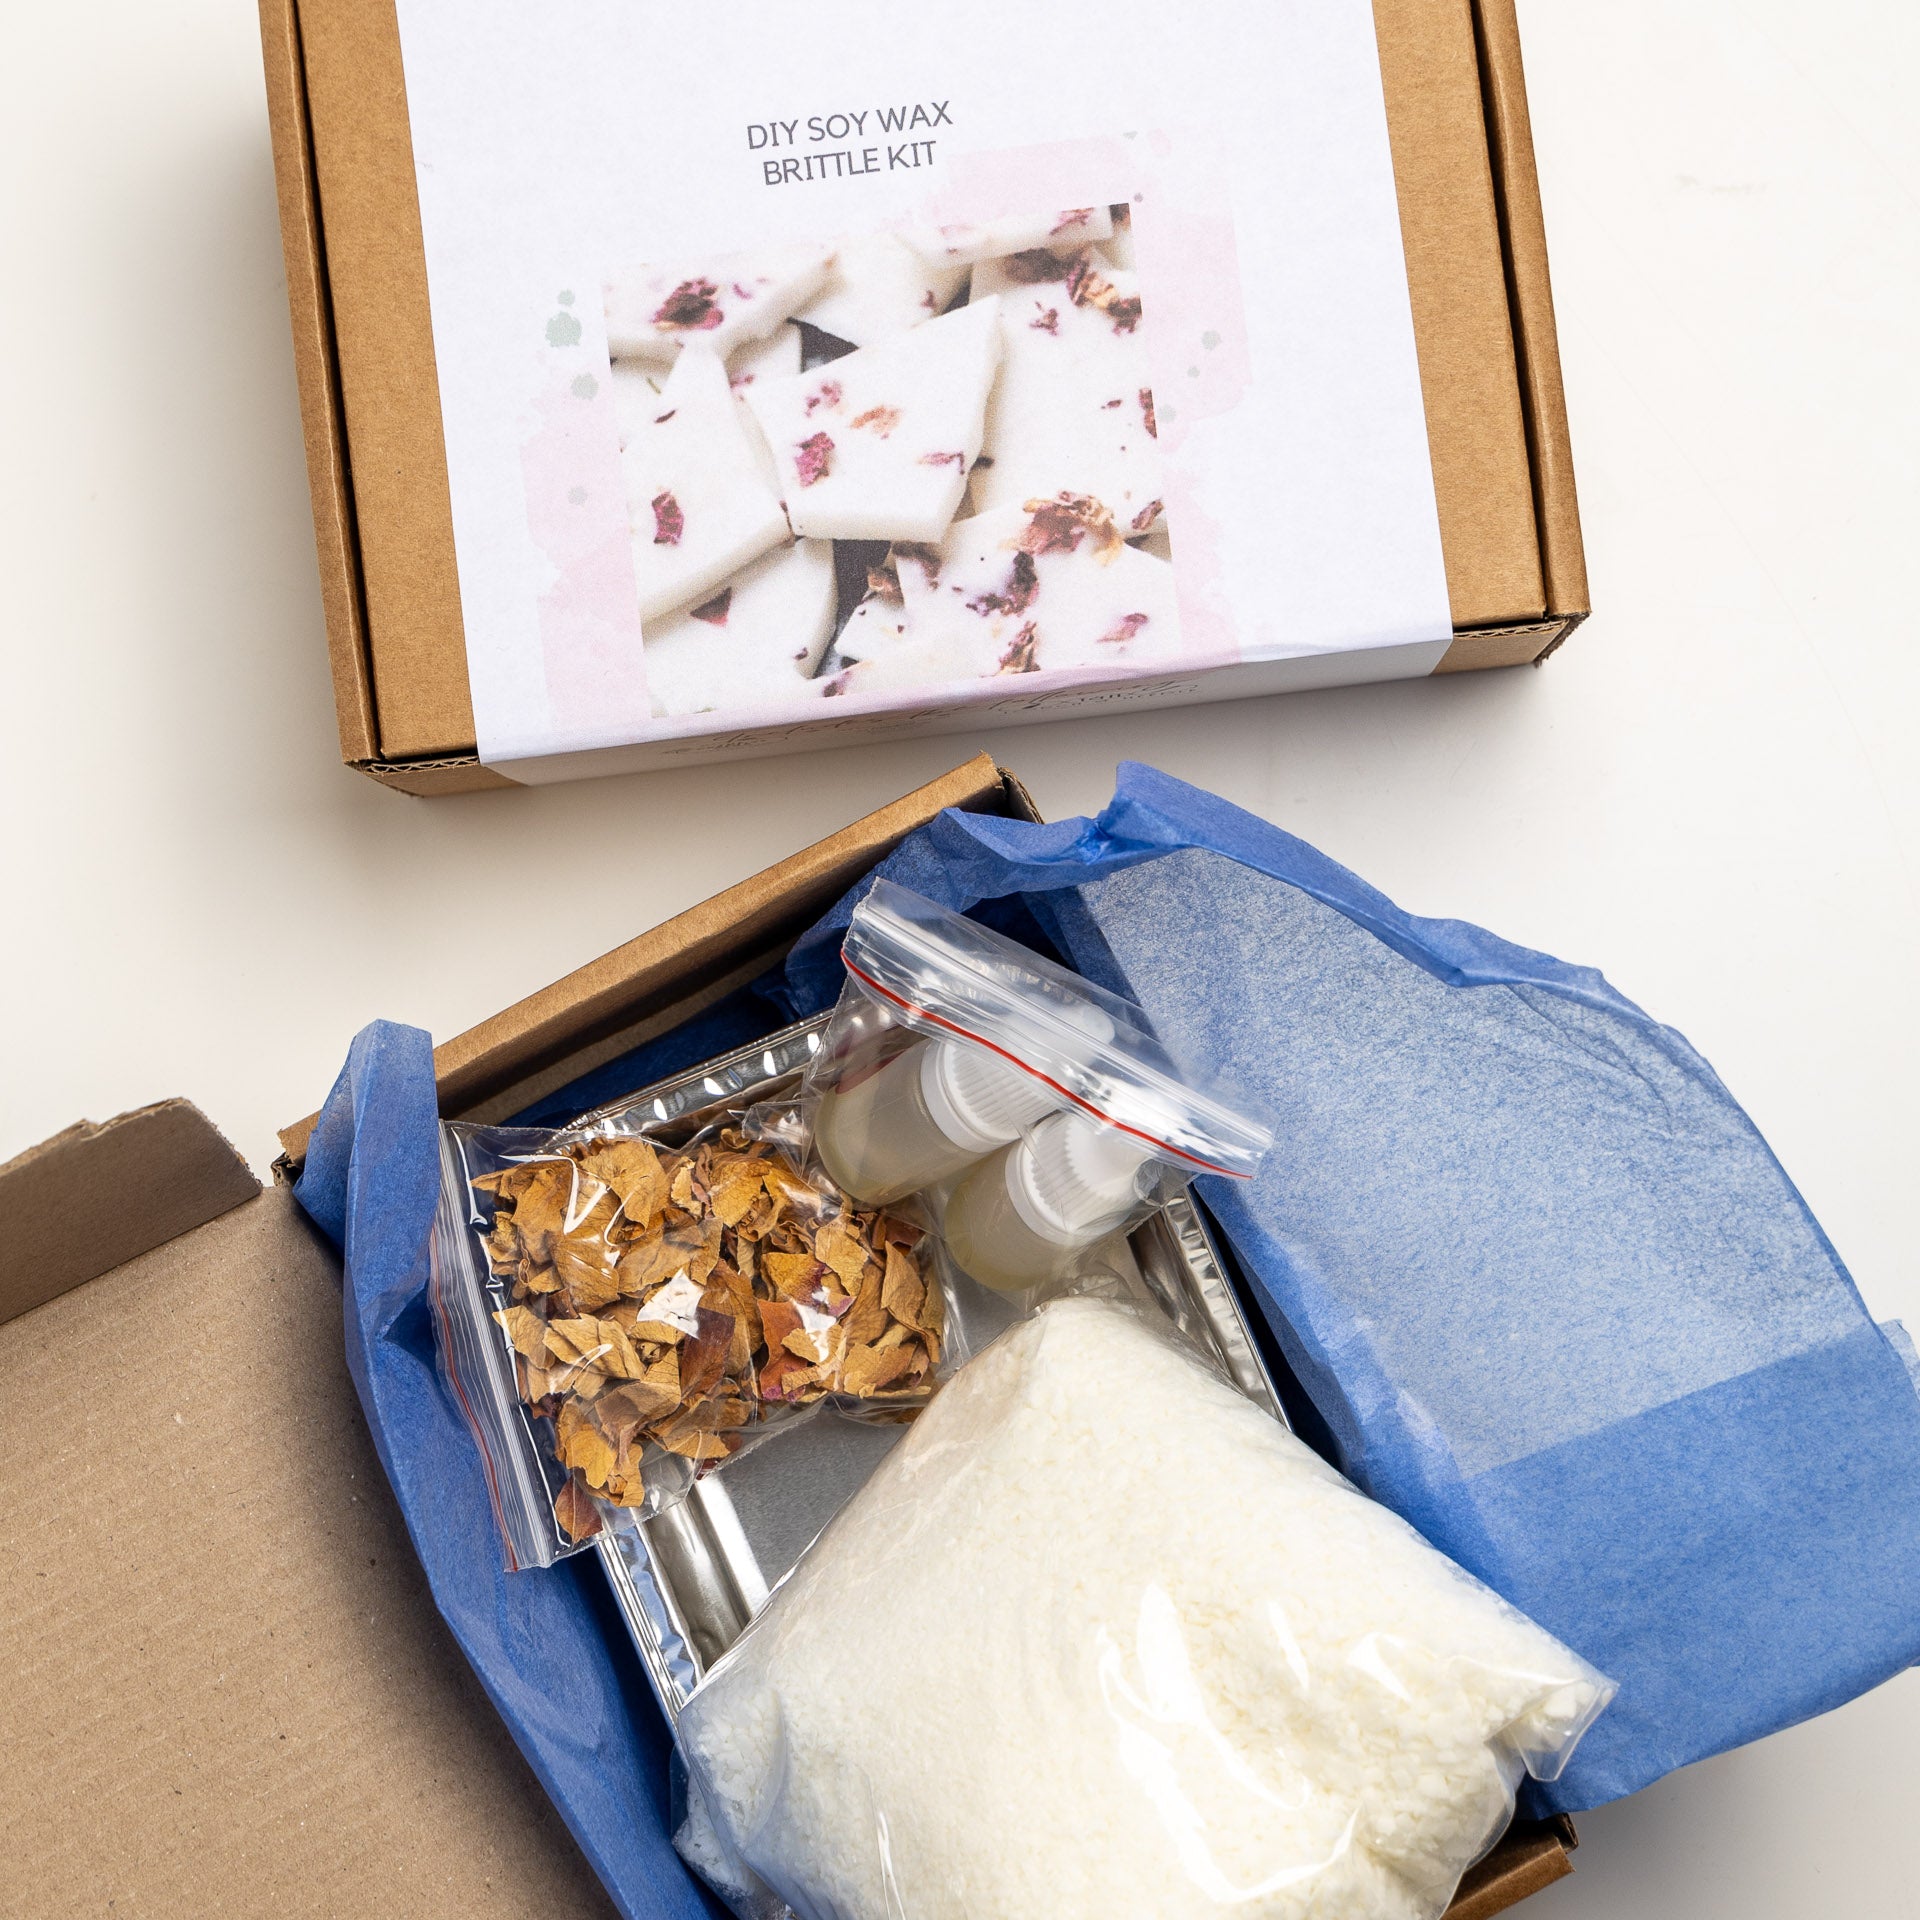 Make Your Own Wax Brittle Kit